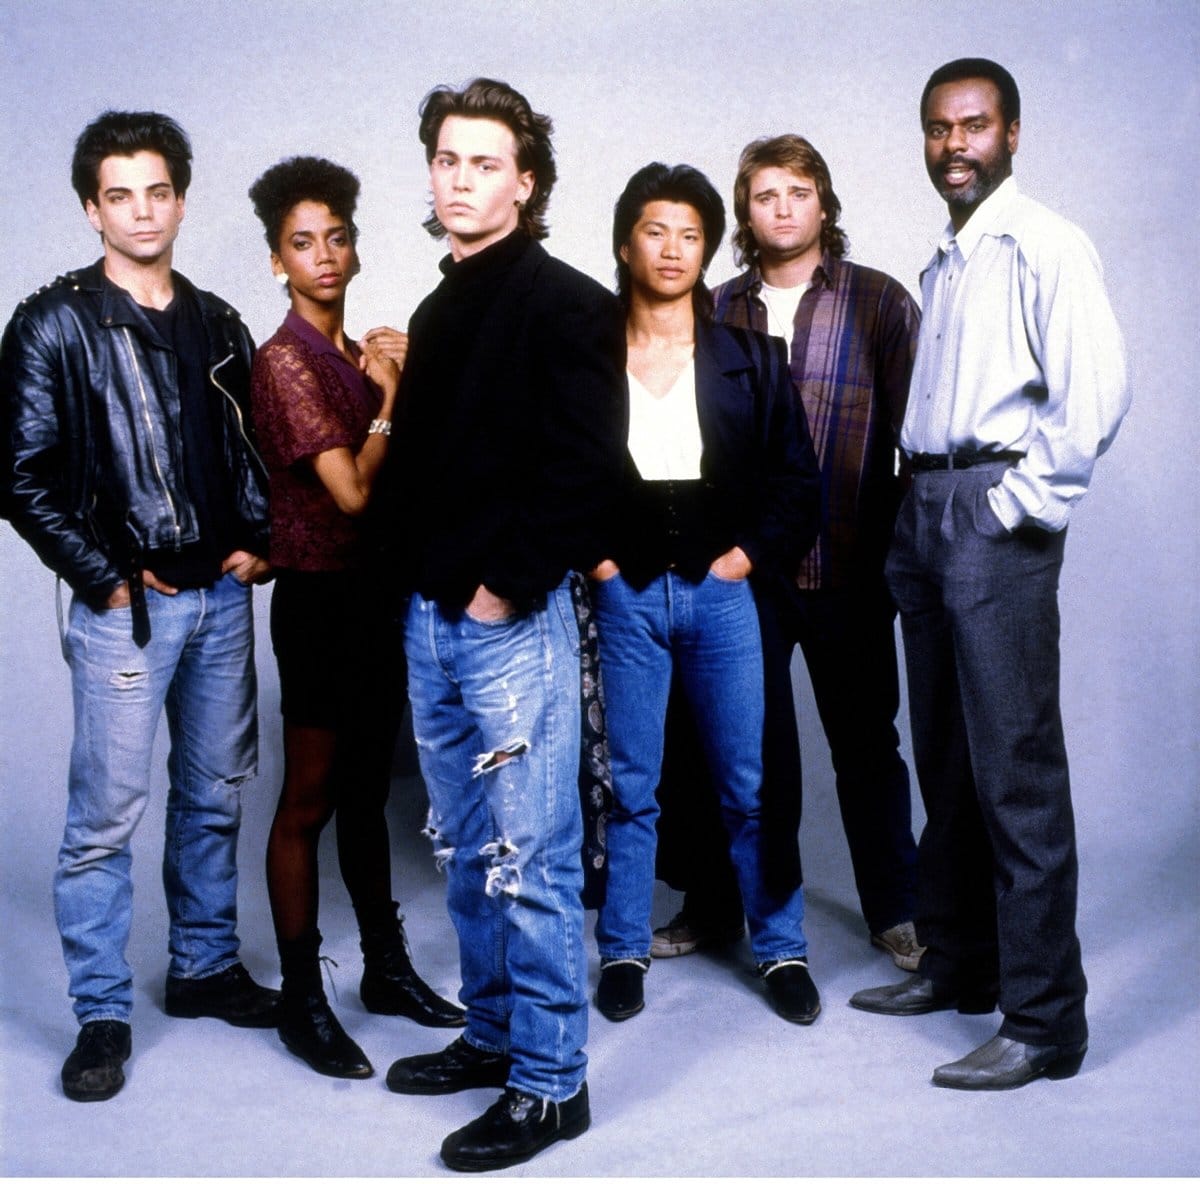 Johnny Depp as Officer Tom Hanson, Steven Williams as Captain Adam Fuller, Peter DeLuise as Officer Doug Penhall, Dustin Nguyen as Officer Harry Truman Ioki, Holly Robinson Peete as Officer Judy Hoffs, and Richard Grieco as Detective Dennis Booker in the American police procedural television series 21 Jump Street